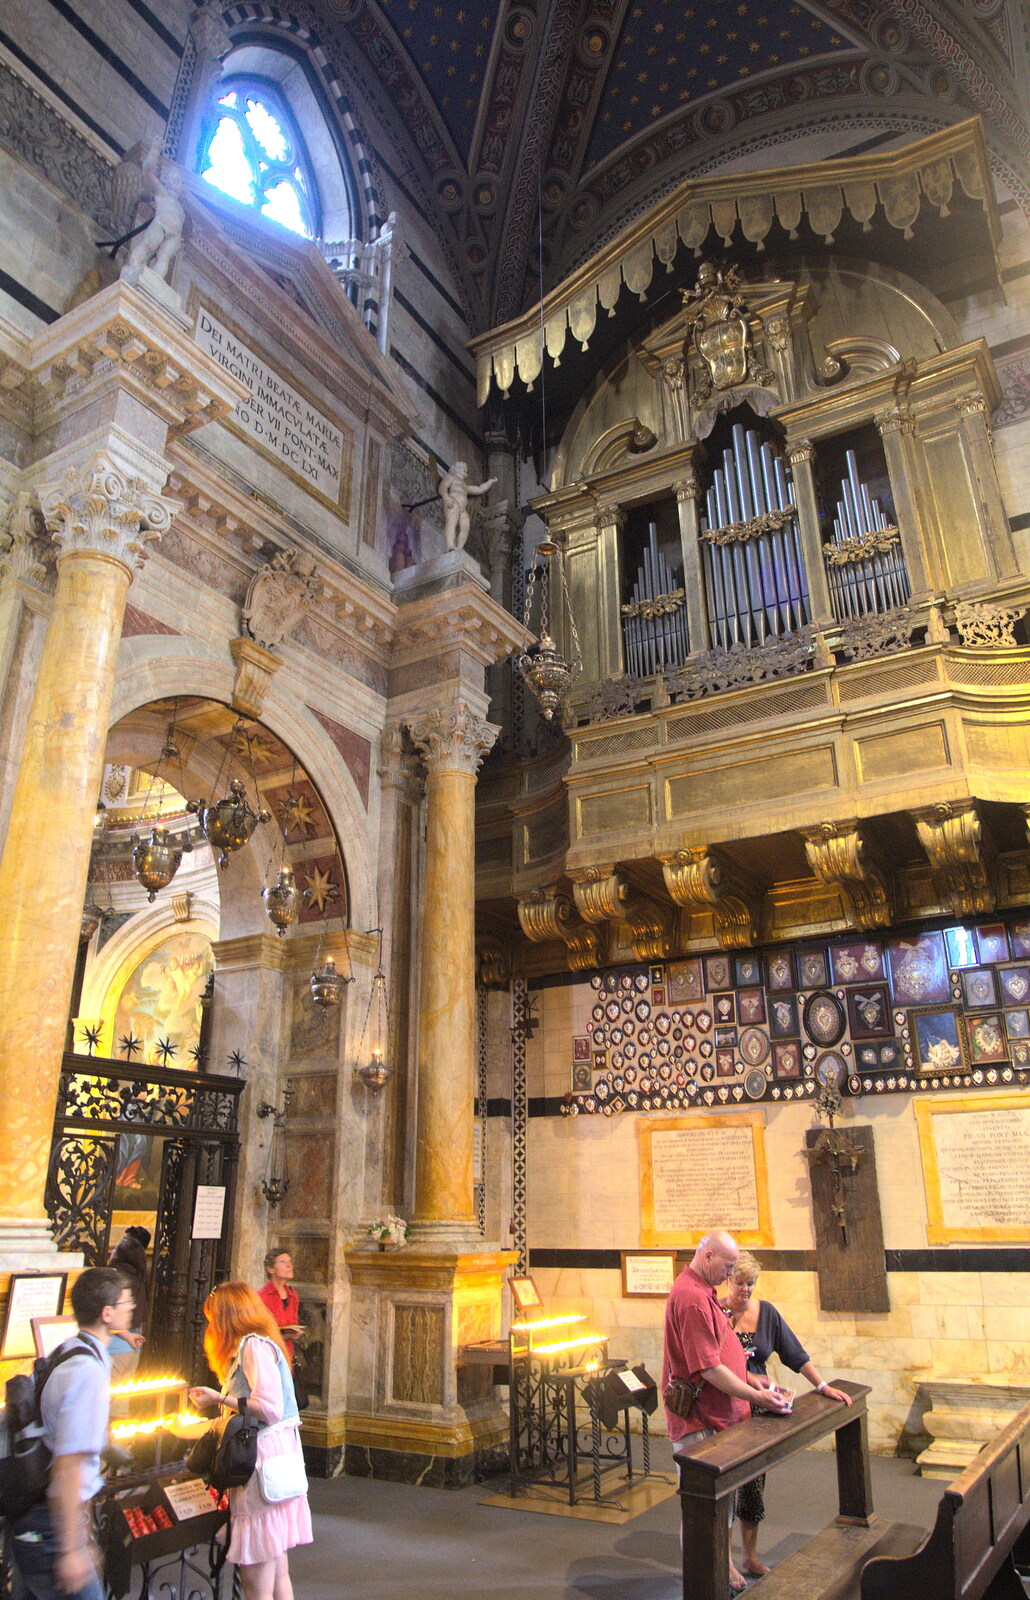 A Tuscan Winery and a Trip to Siena, Tuscany, Italy - 10th June 2013: The duomo's organ